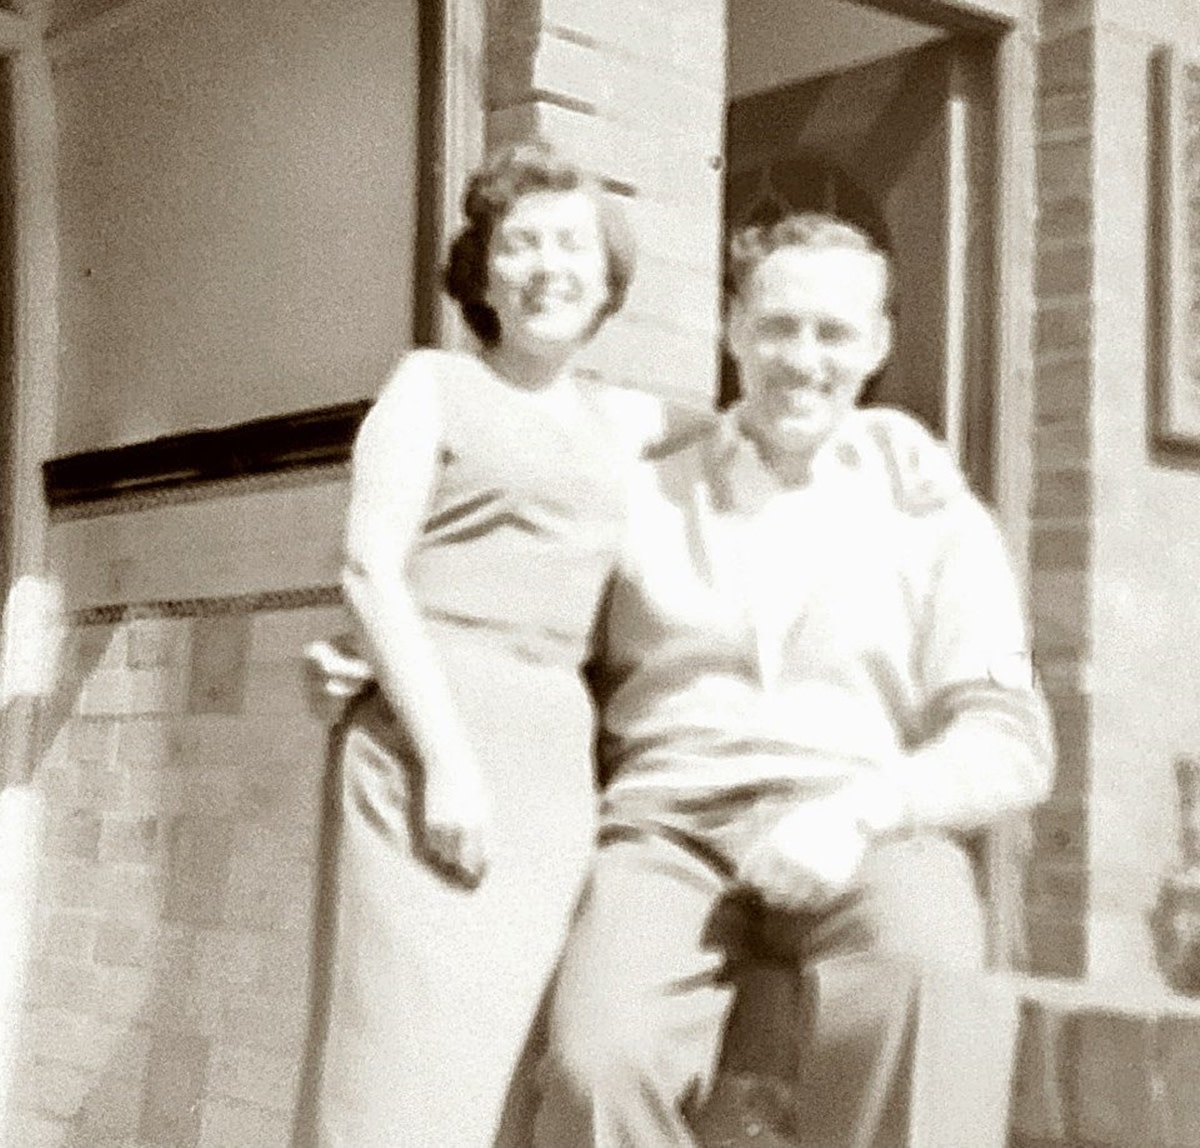 Mum and dad in their younger days.